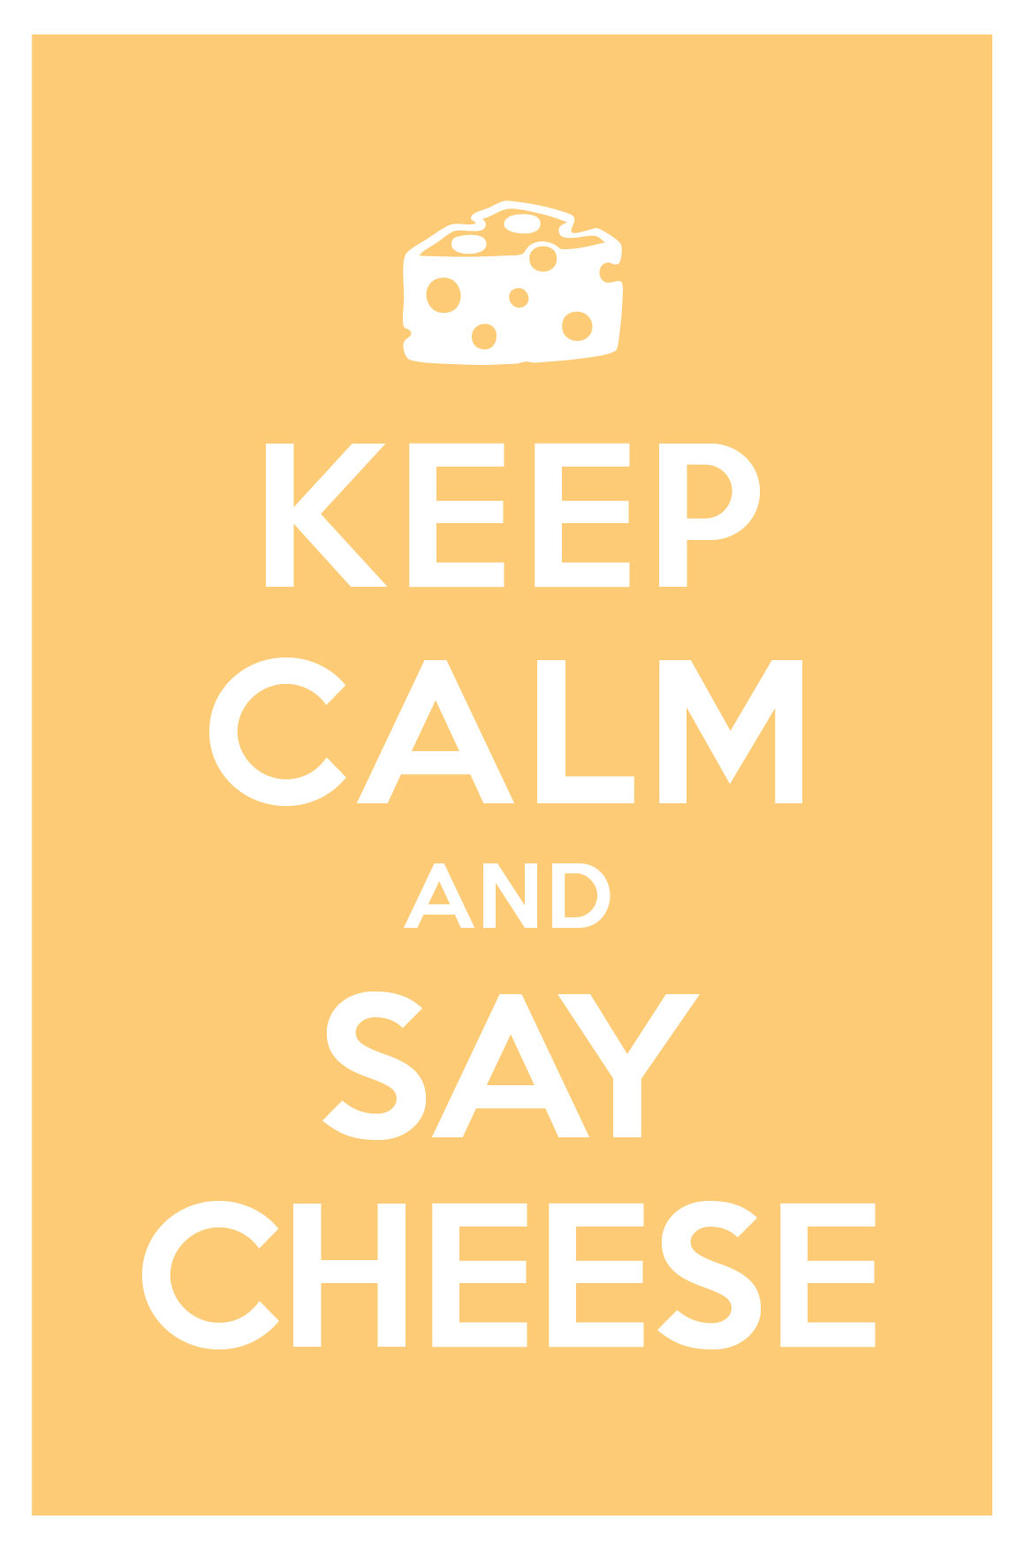 KEEP CALM AND SAY CHEESE